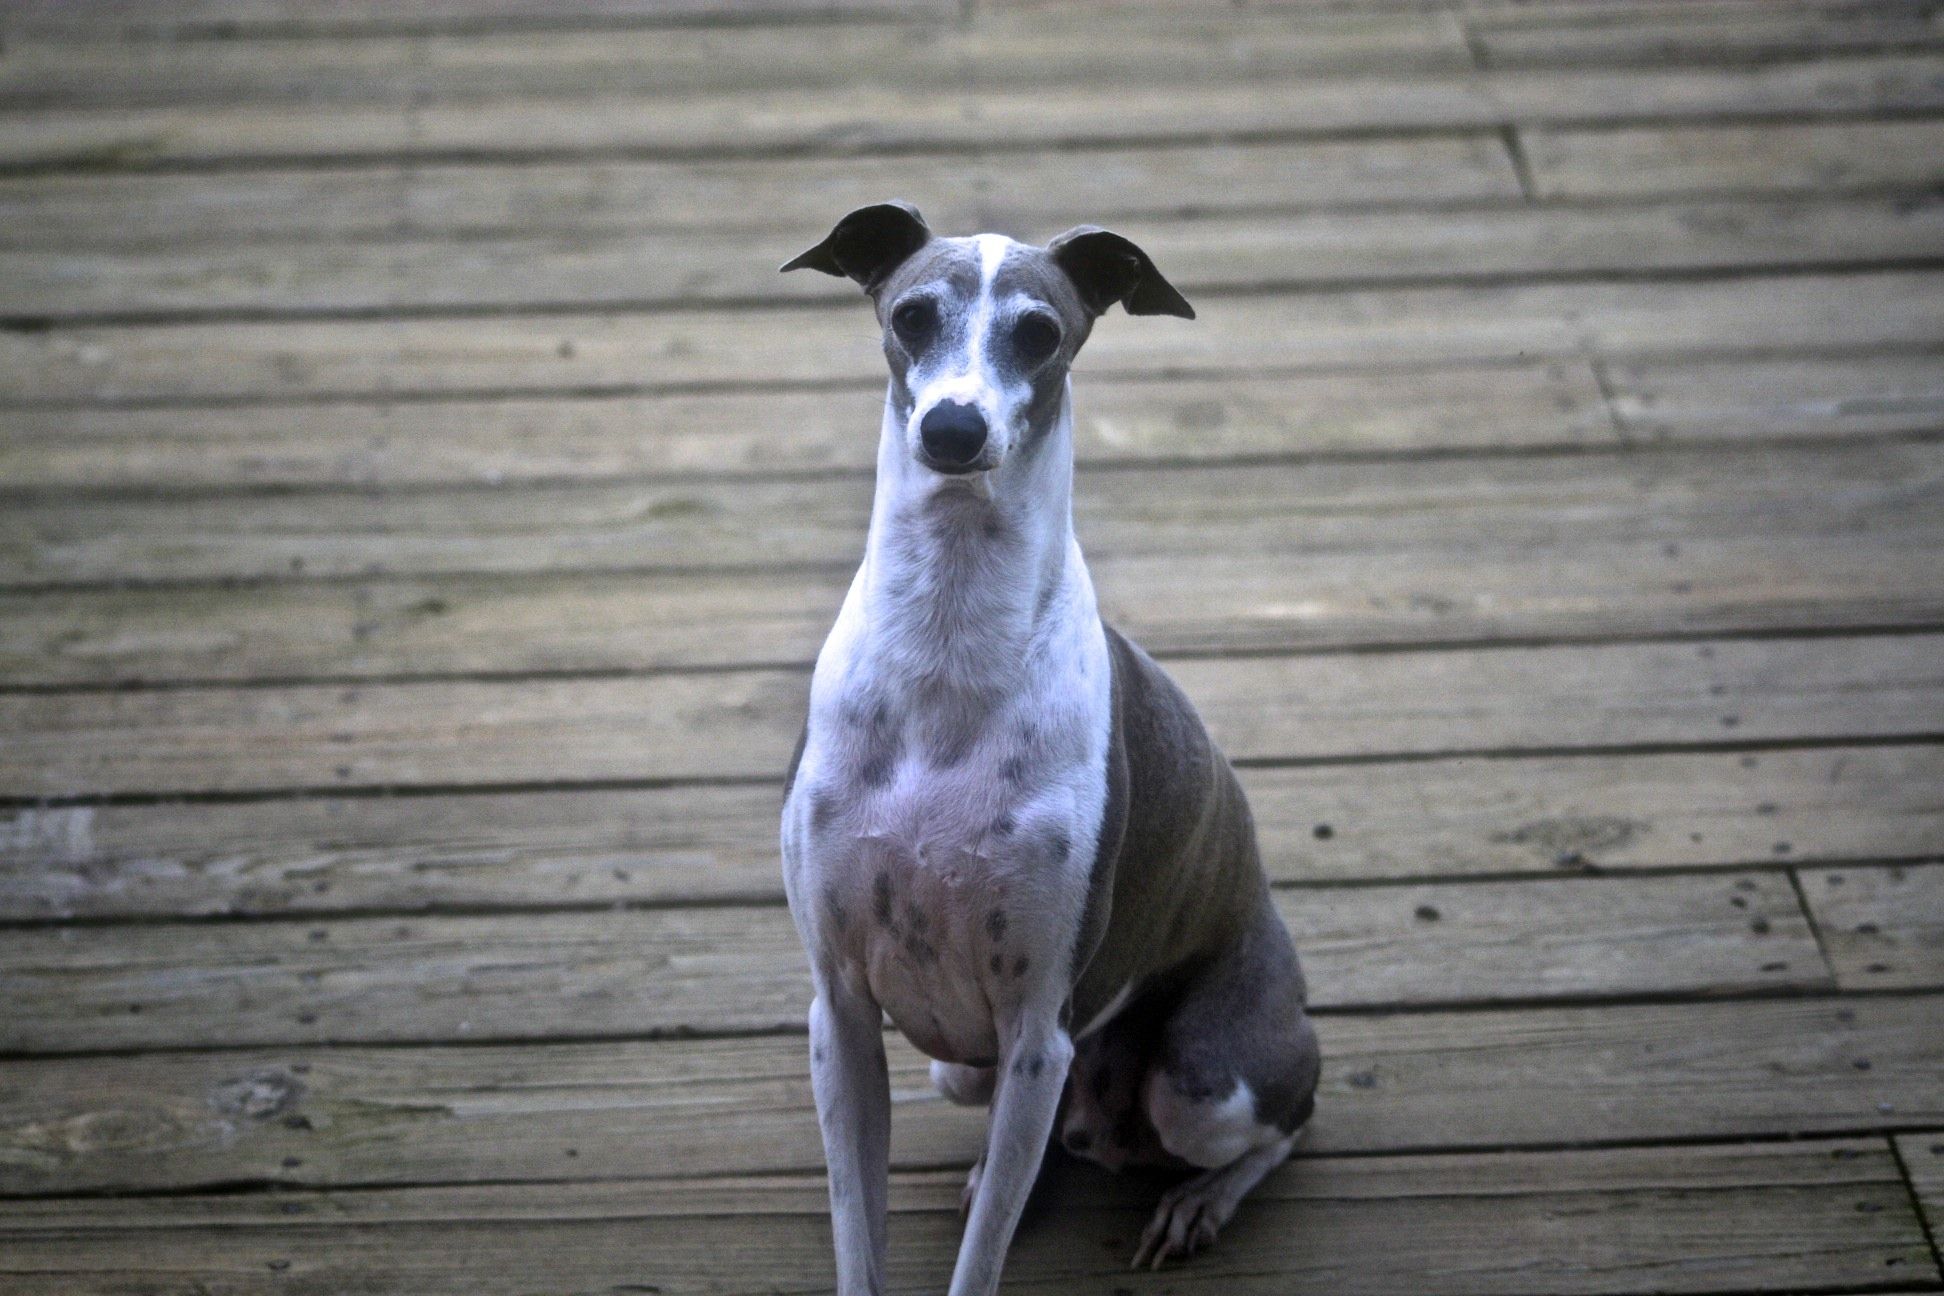 Italian Greyhound Information - Dog Breeds at thepetowners